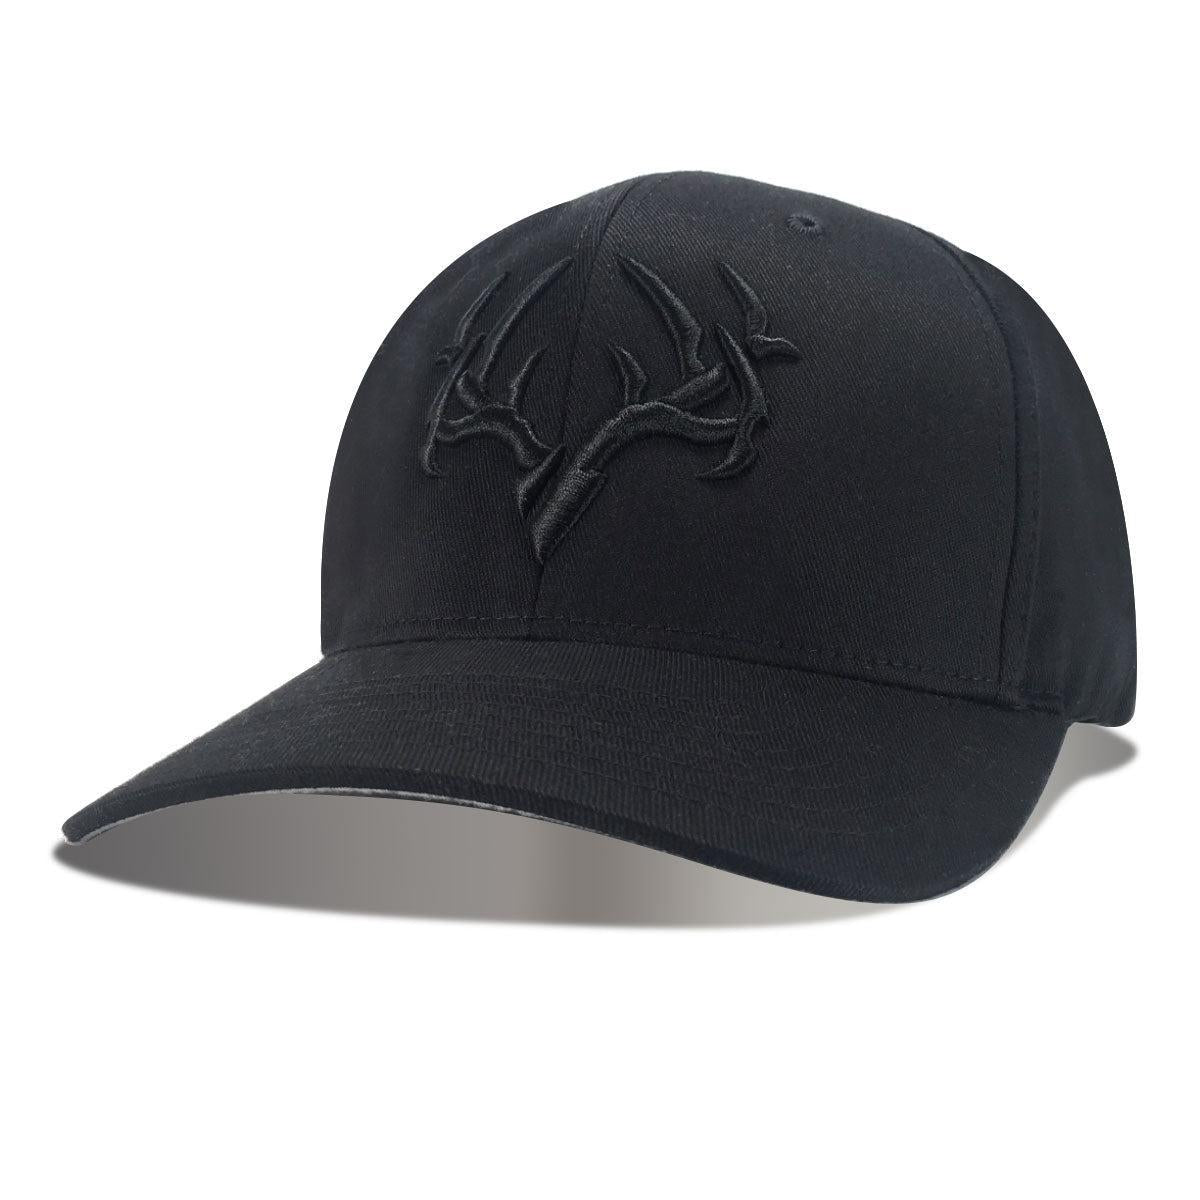 Eastwood Black Flex Hat (Youth/Adult to XXL Sizes)